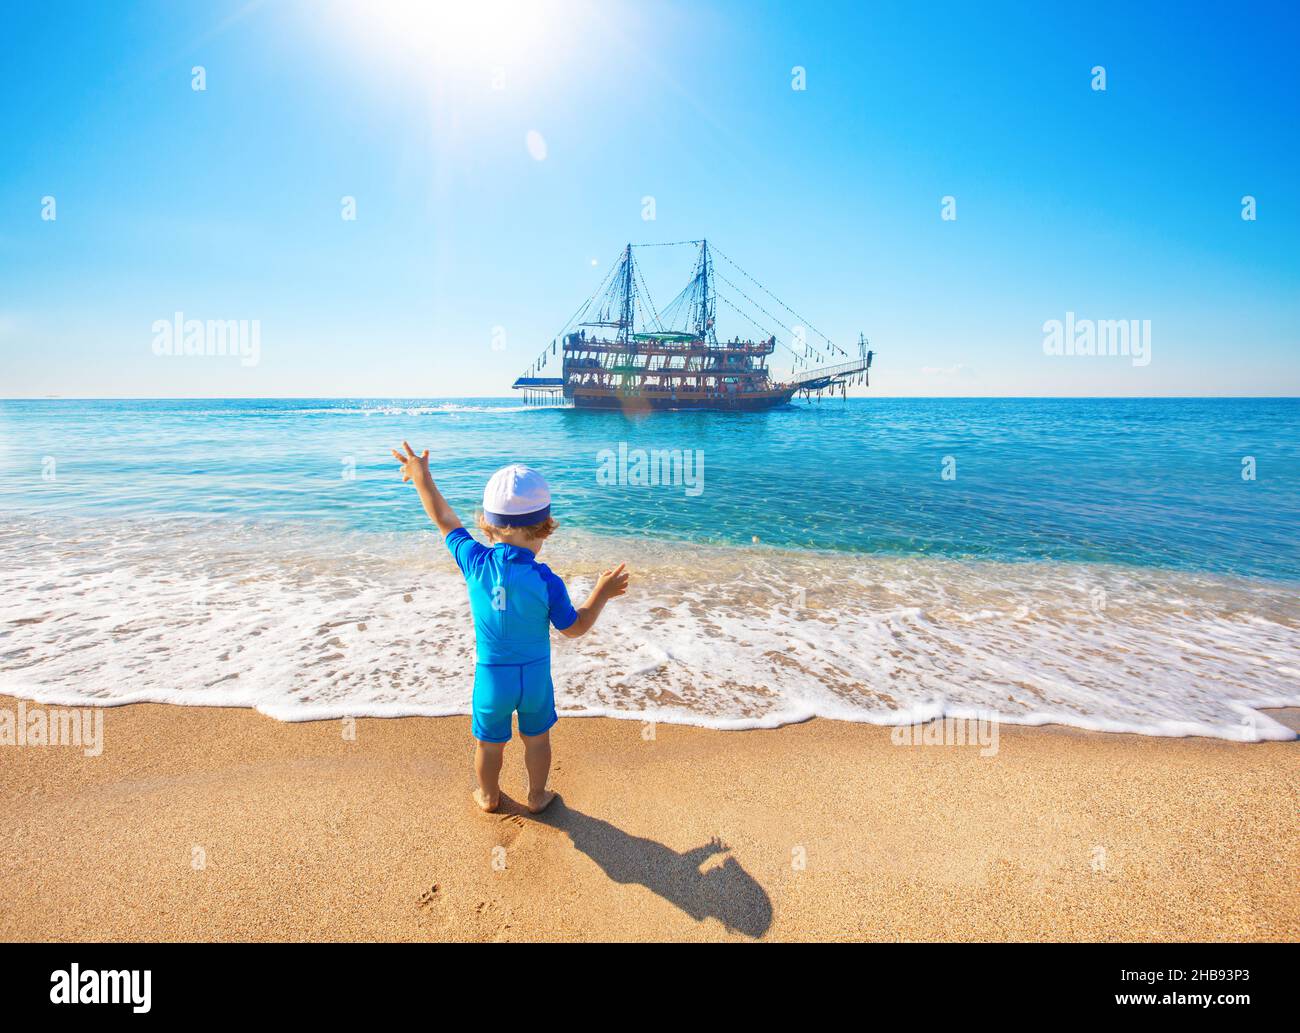 A little child on the beach waves to a sailing ship Stock Photo